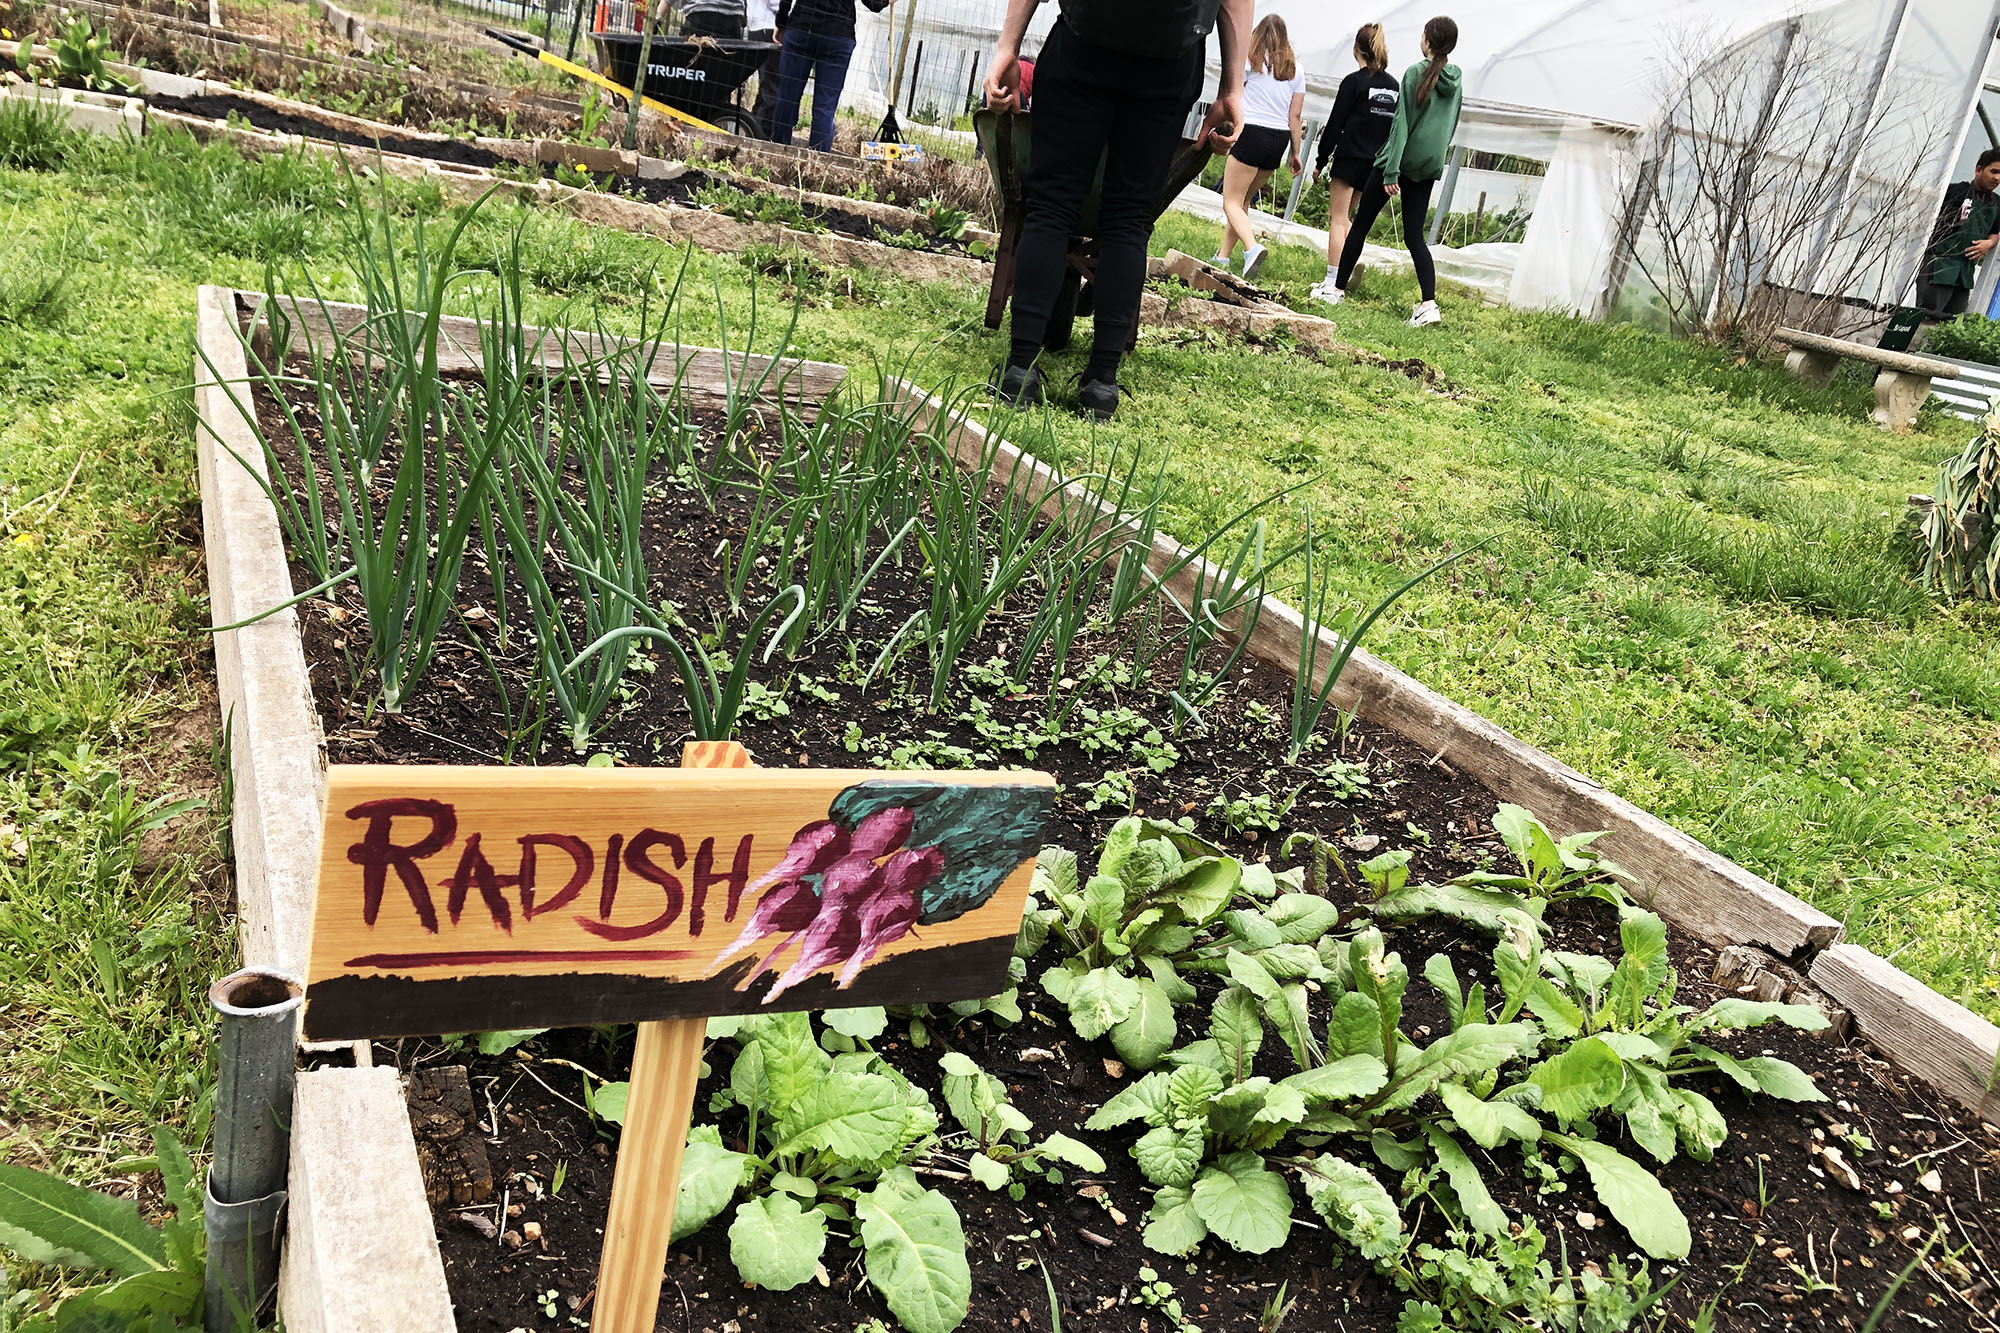 a photo taken at an angle with a radish plant sign in the foreground, with a series of raised garden beds with plants and a hoop house in the background with people walking around and storm clouds overhead 